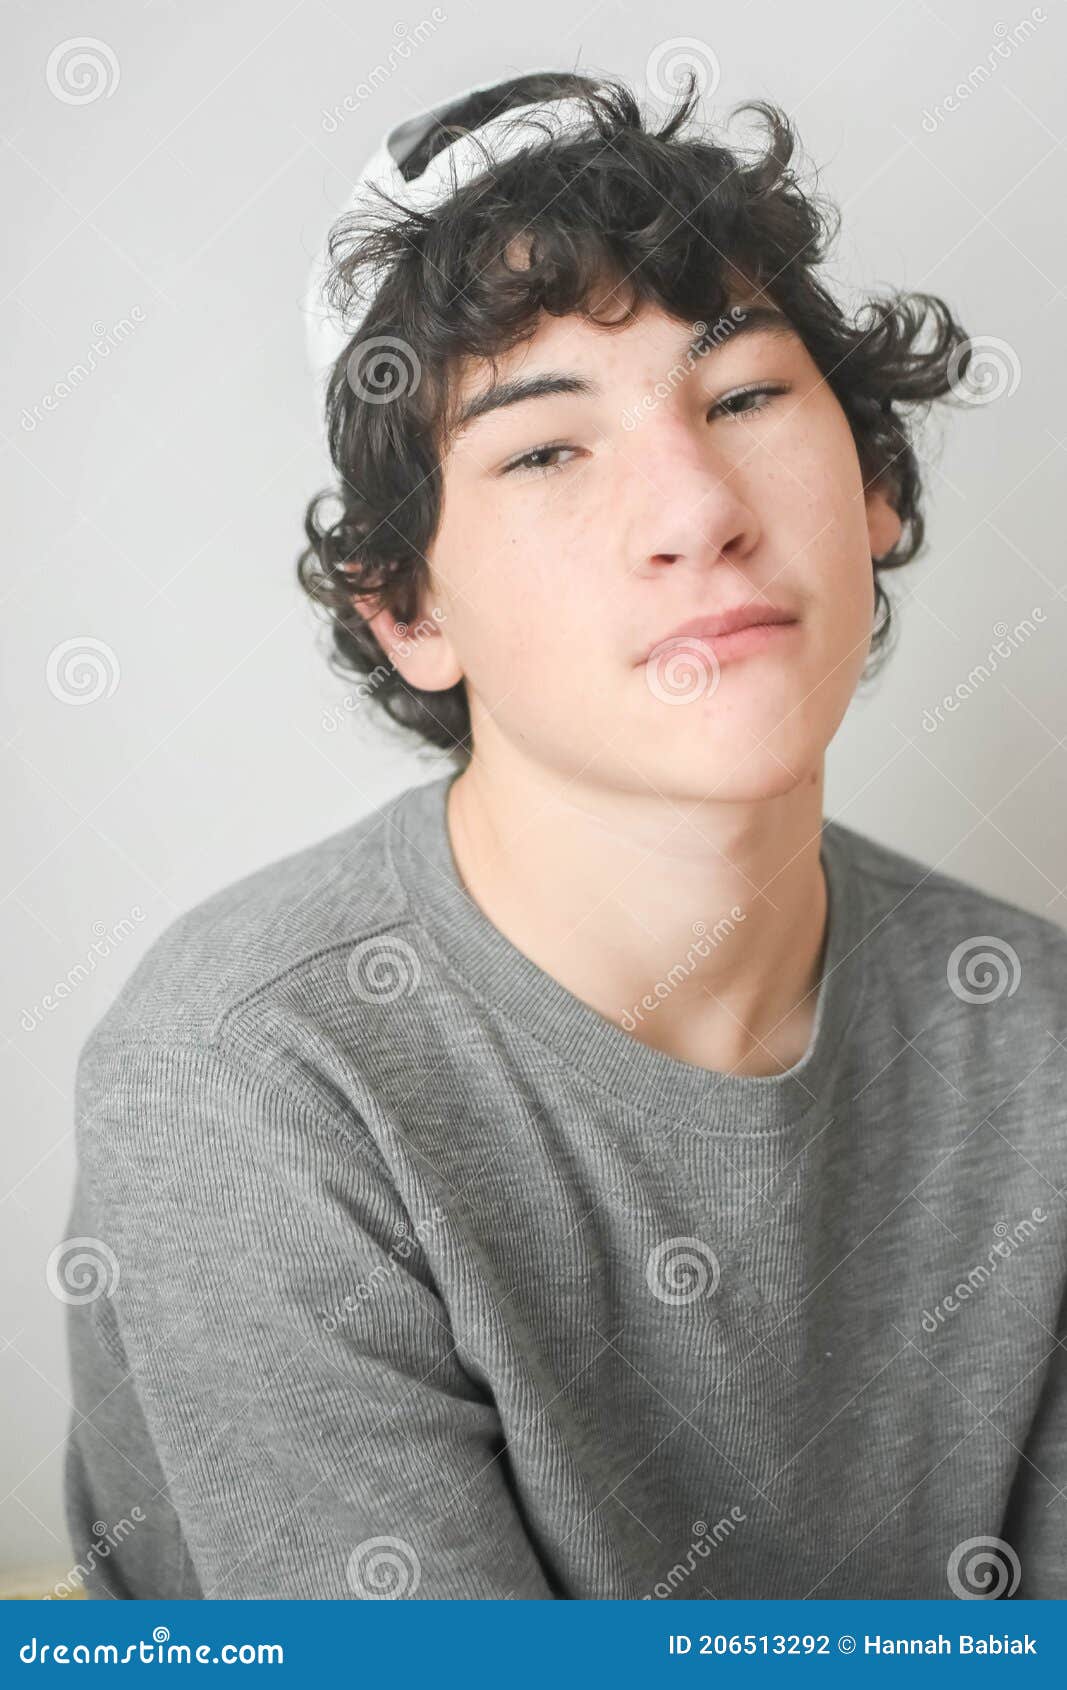 Portrait of Boy with Curly Hair and Baseball Cap Stock Photo - Image of  isolated, baseball: 206513292